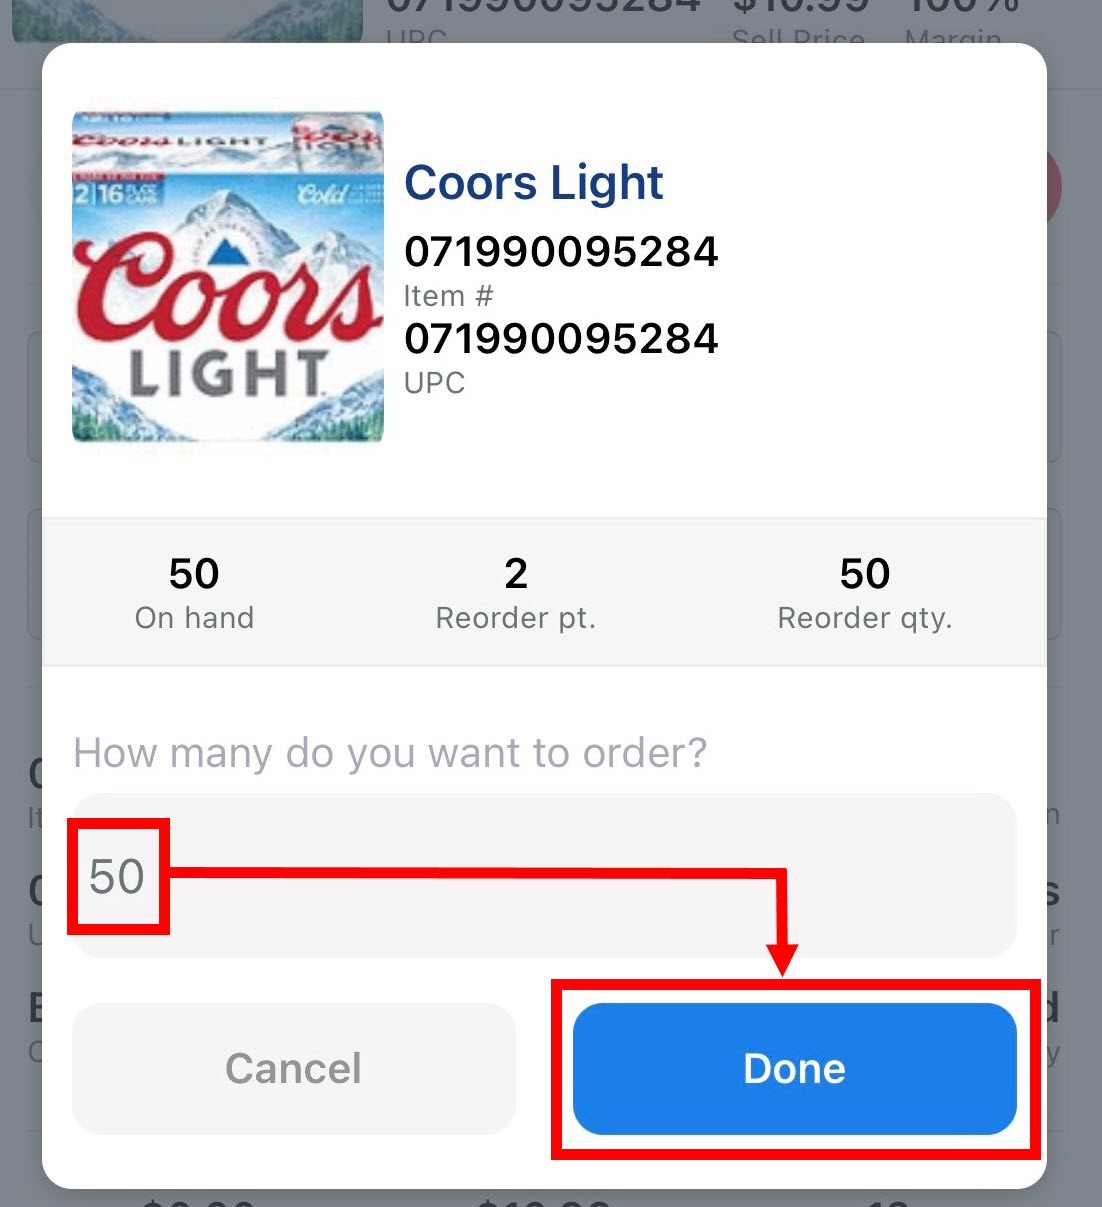 Amount of 50 entered into how many do you want to order field with arrow pointing to done button